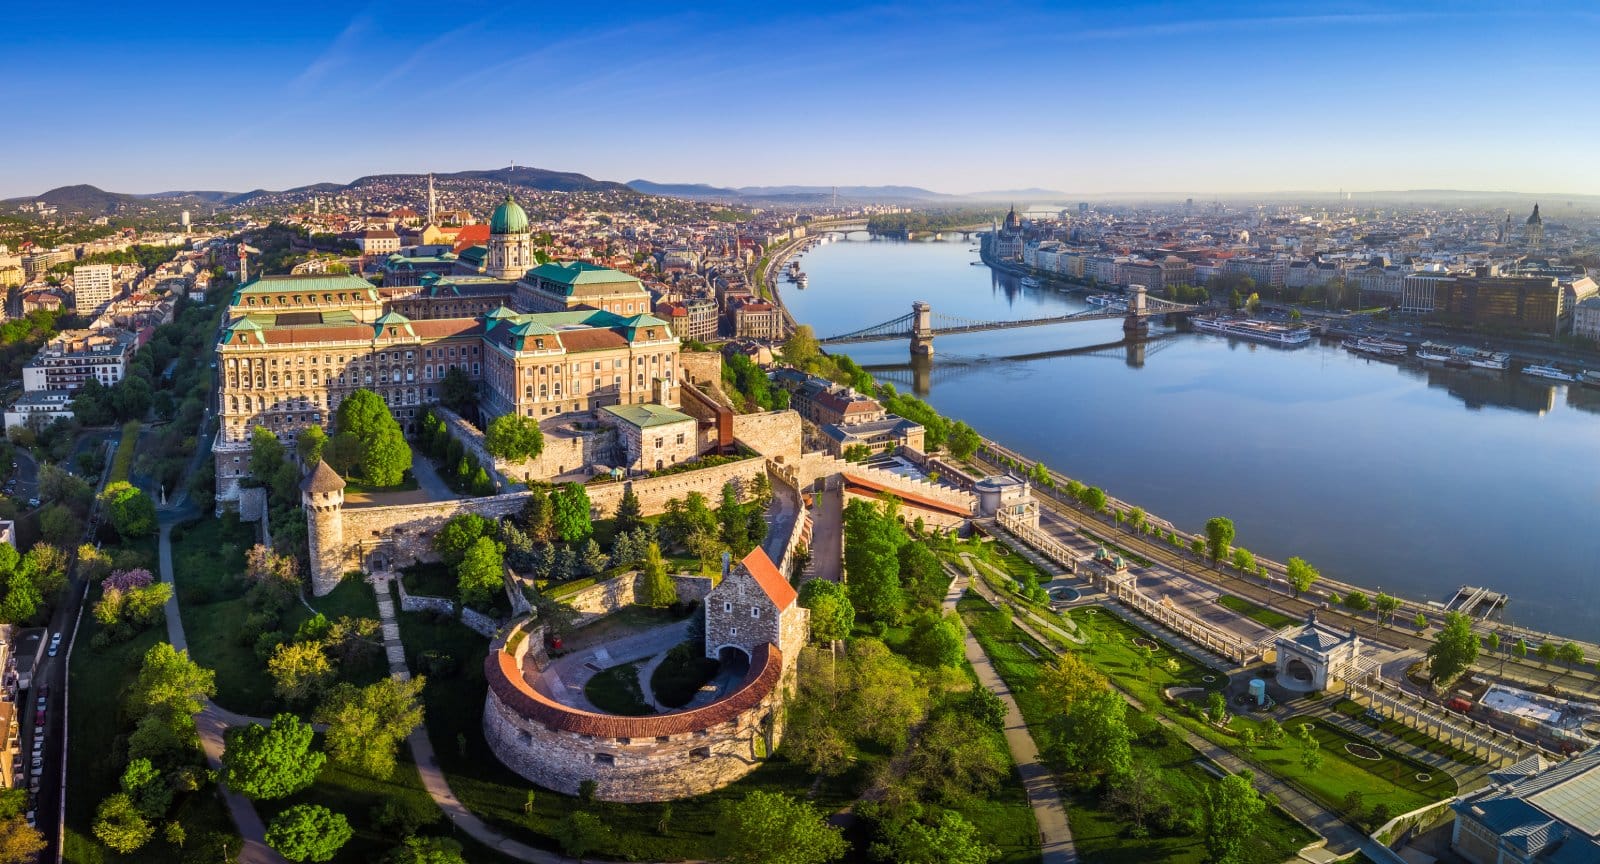 <p><span>Also known as the White Card, the Hungary digital nomad visa allows remote workers with foreign employers and clients to live and work in this Eastern European country.</span></p><p><b>Cost of application:</b><span> 110 EUR in home country, 76 EUR via online portal</span></p><p><b>Income requirement:</b><span> 2000 EUR per month</span></p><p><b>Visa duration:</b><span> 1 year</span></p>